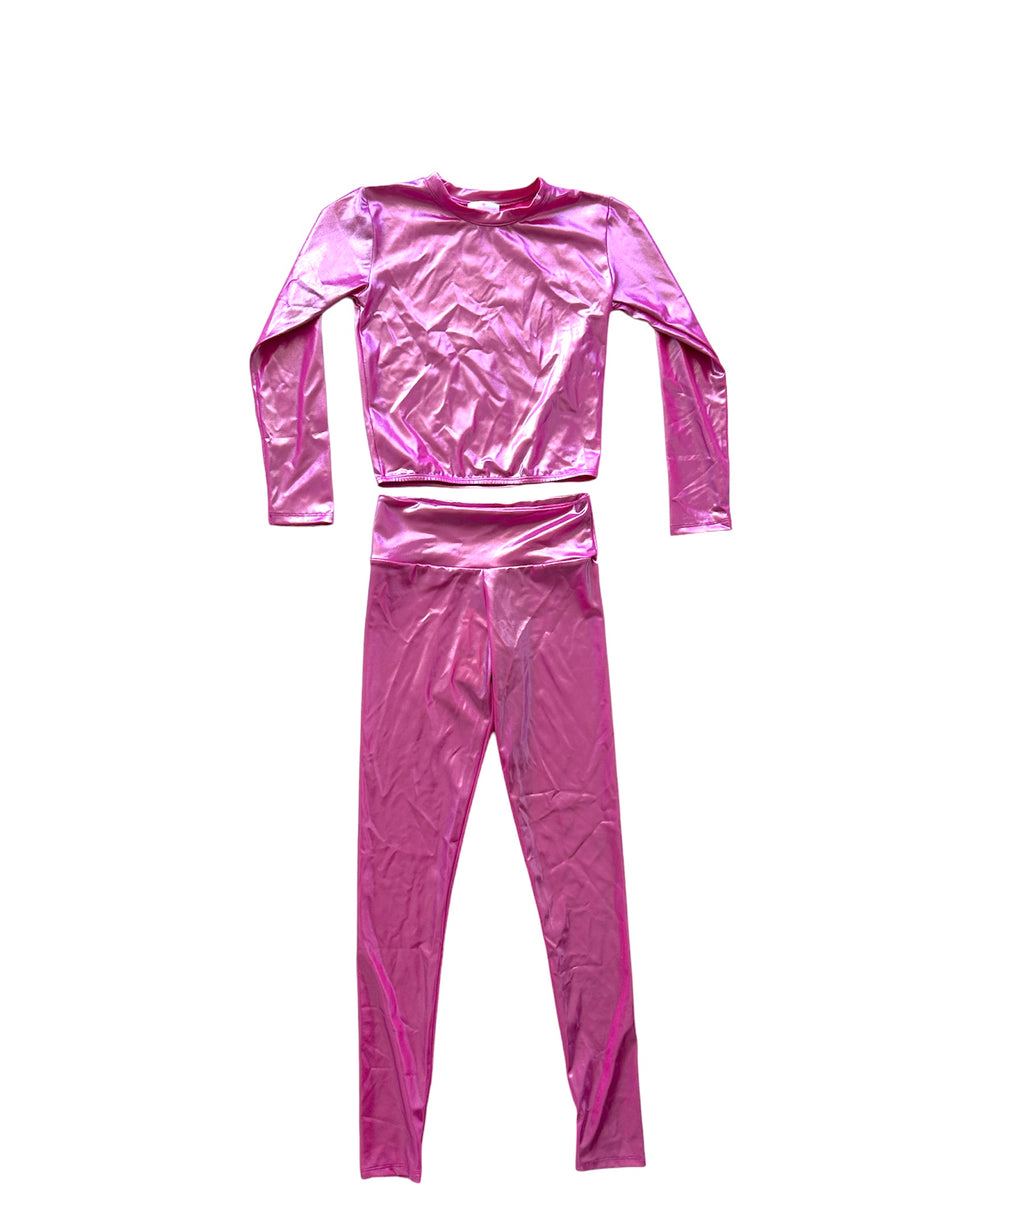 ACTIVEWEAR GLOSSY PINK